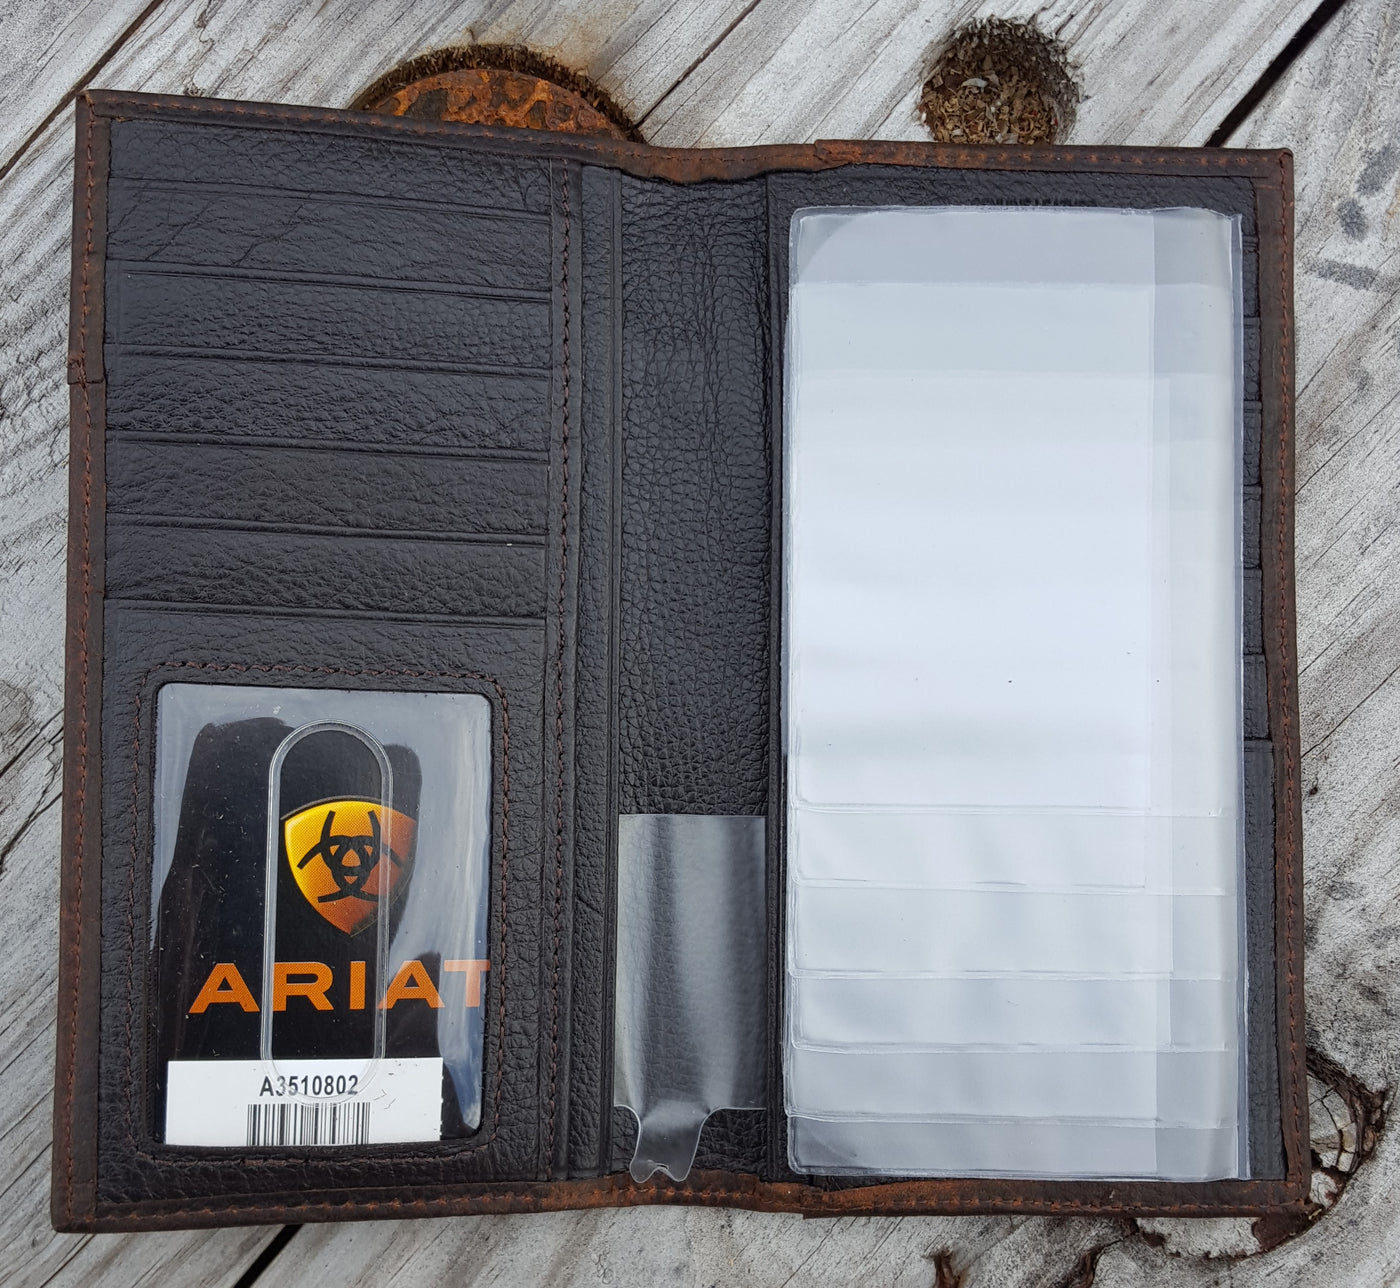 Inside left view of Ariat Work Rodeo Wallet-Ariat Leather Rodeo Wallet Oil tanned dark copper leather, and Ariat brand concho. Inside features a clear ID slot, 12 credit card slots, removable photo slip, and money slot. Folded dimensions are 7" by 3"